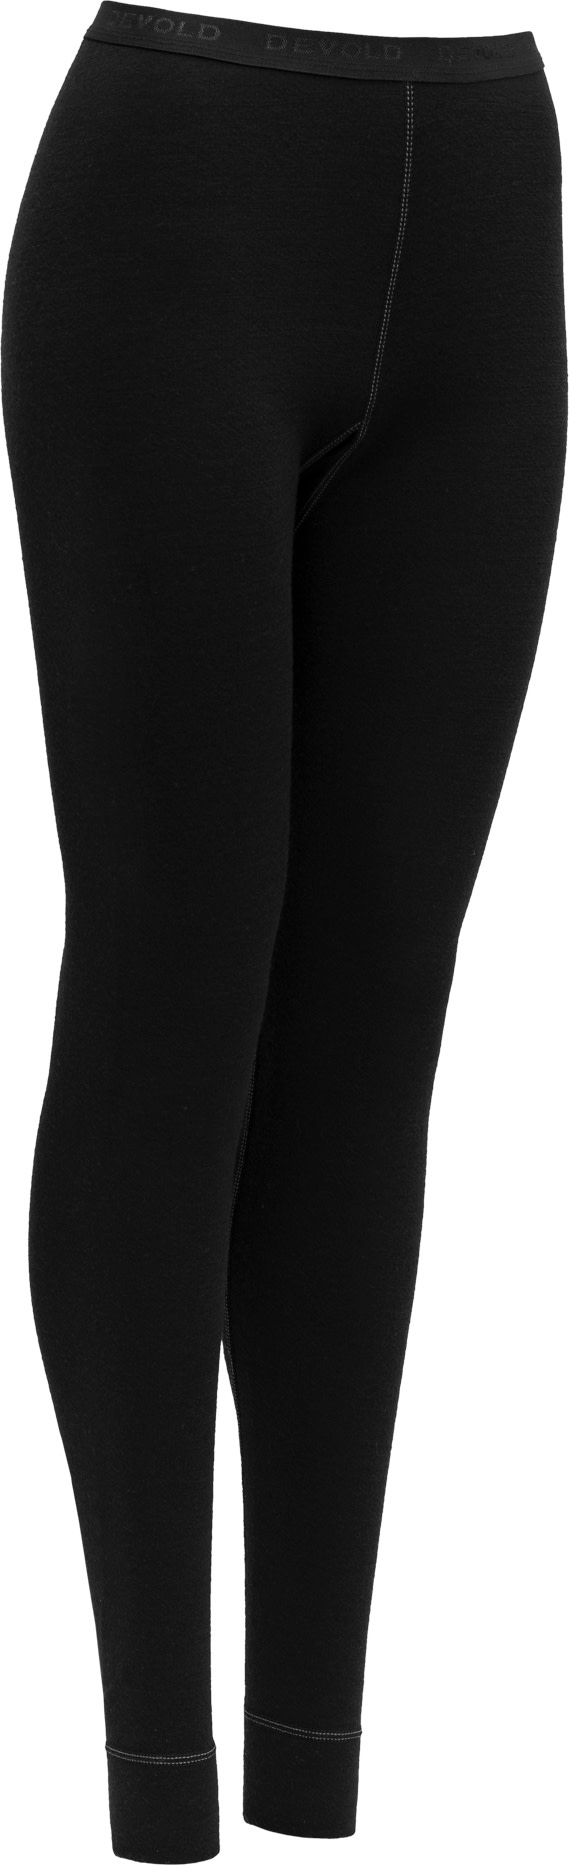 Devold Women’s Expedition Long Johns BLACK